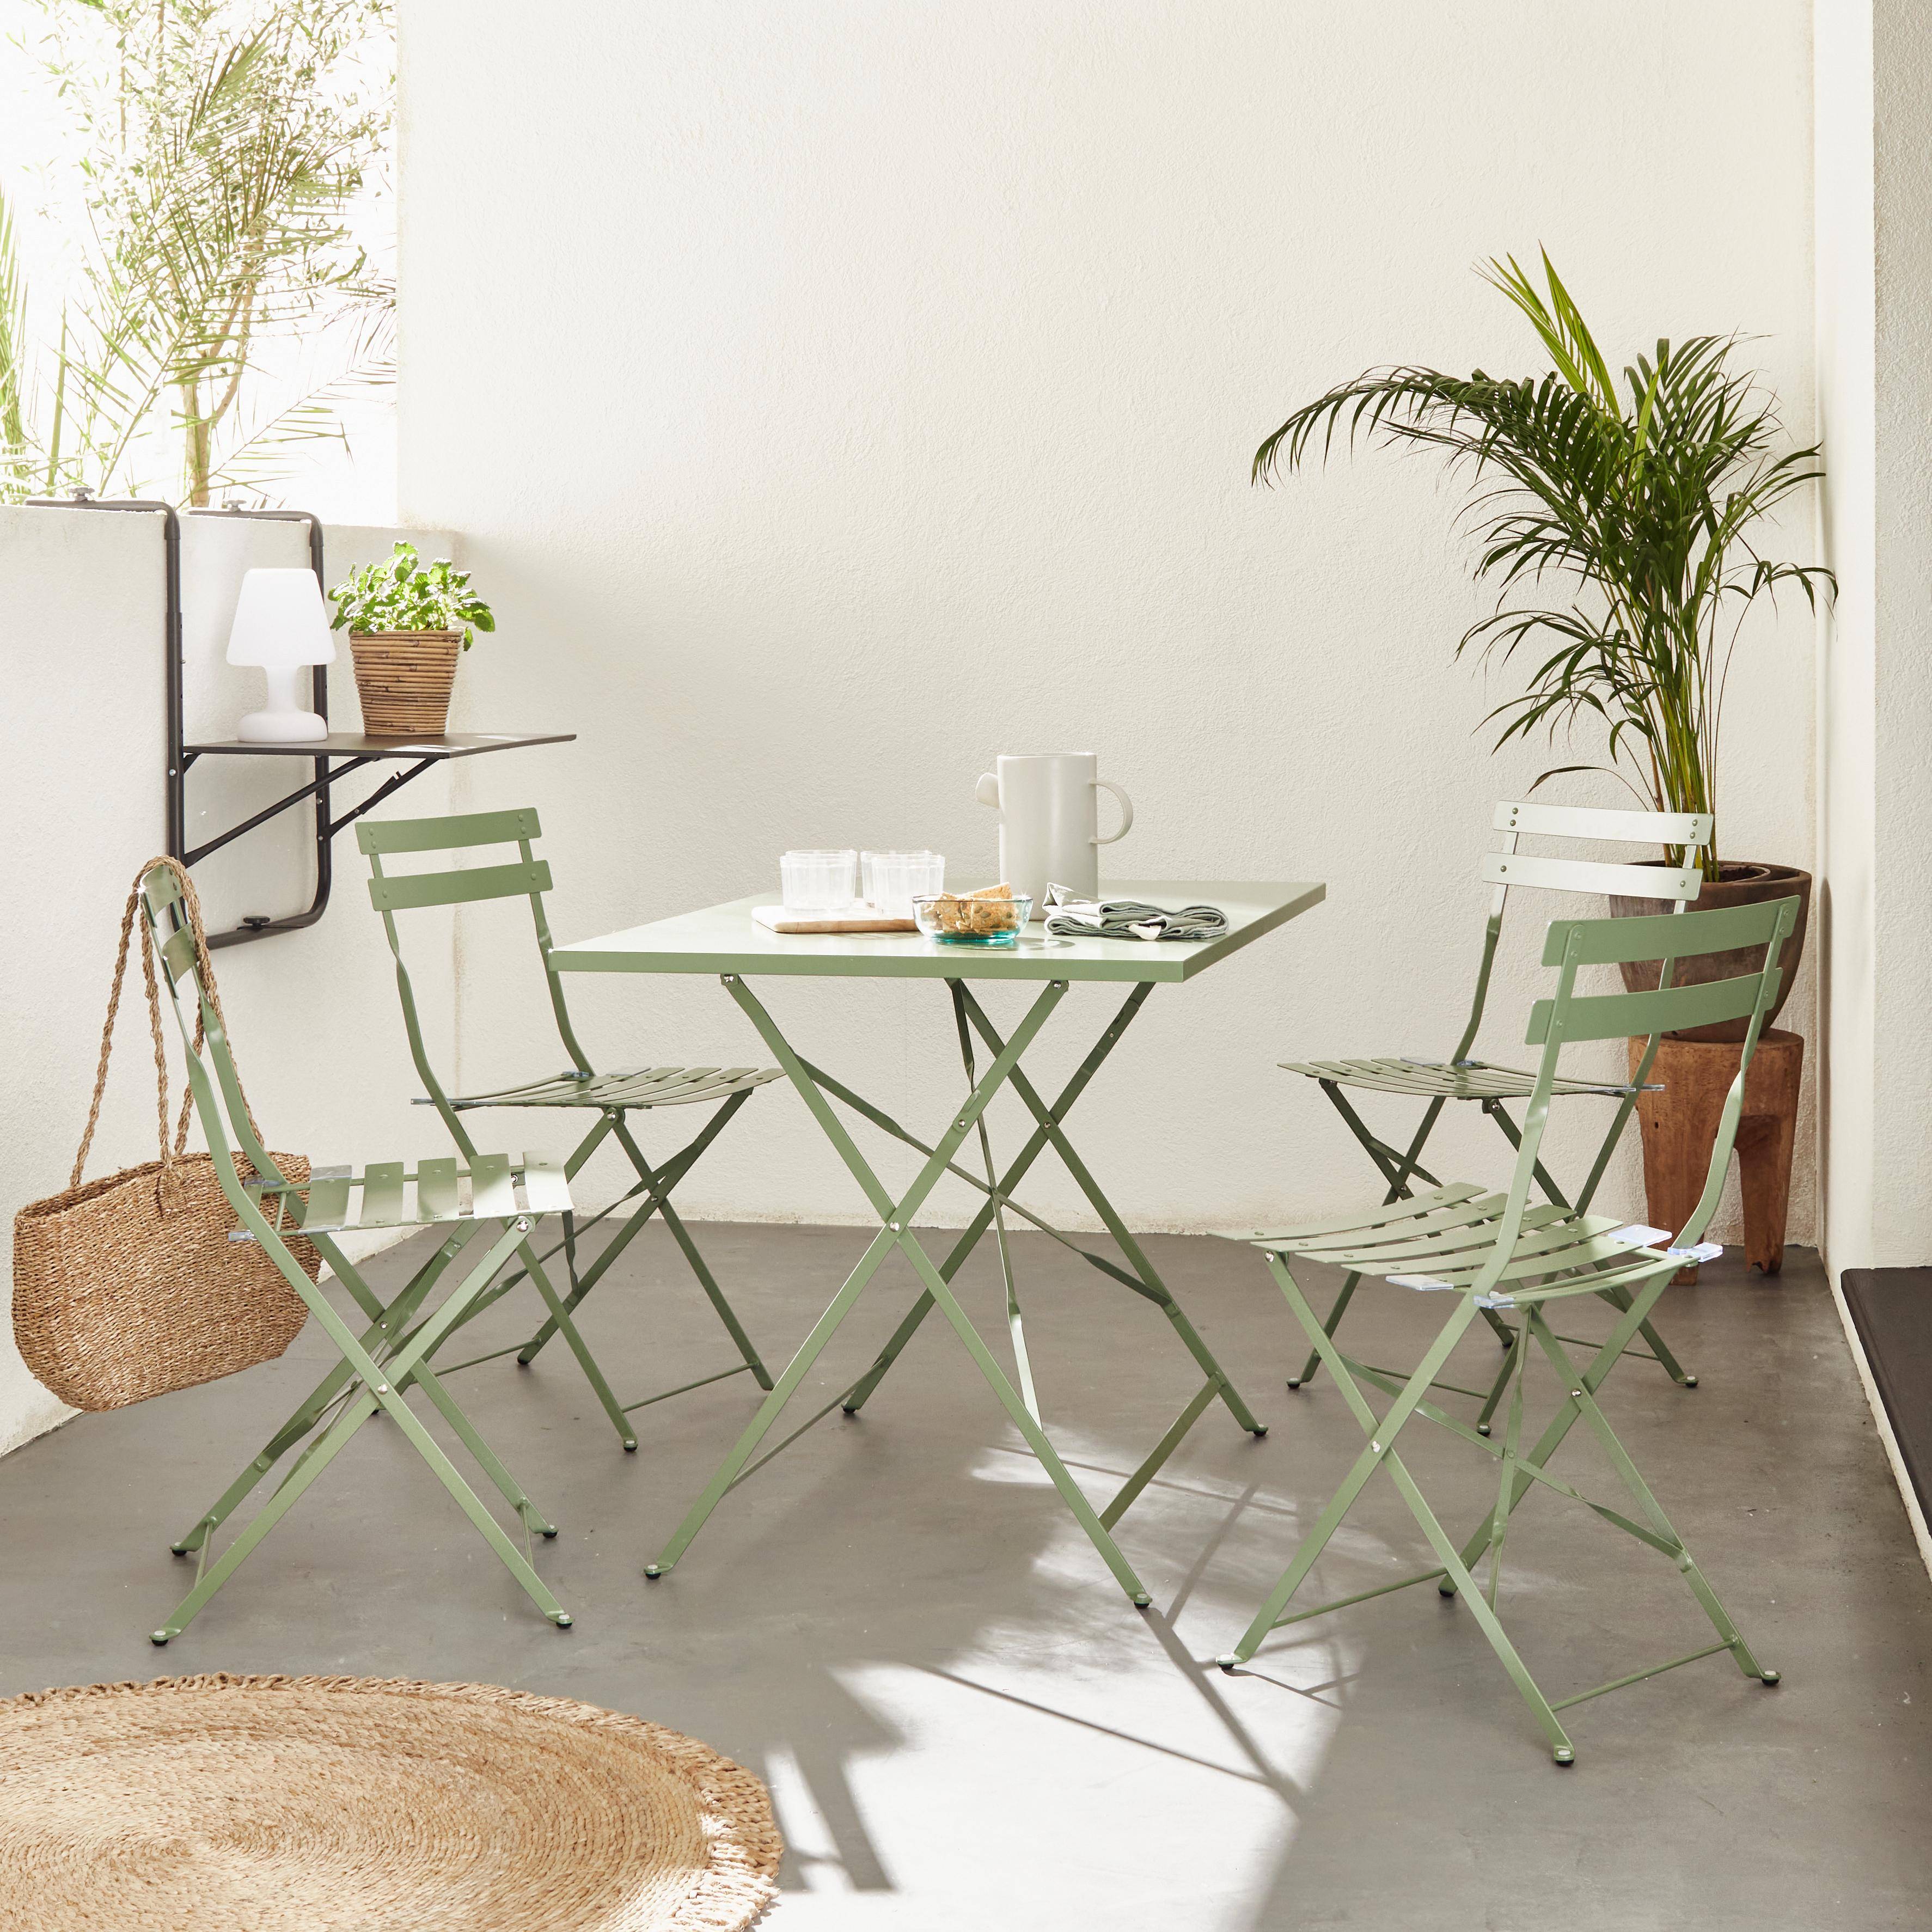 4-seater foldable thermo-lacquered steel bistro garden table with chairs, 110x70cm - Emilia - Sage green Photo1